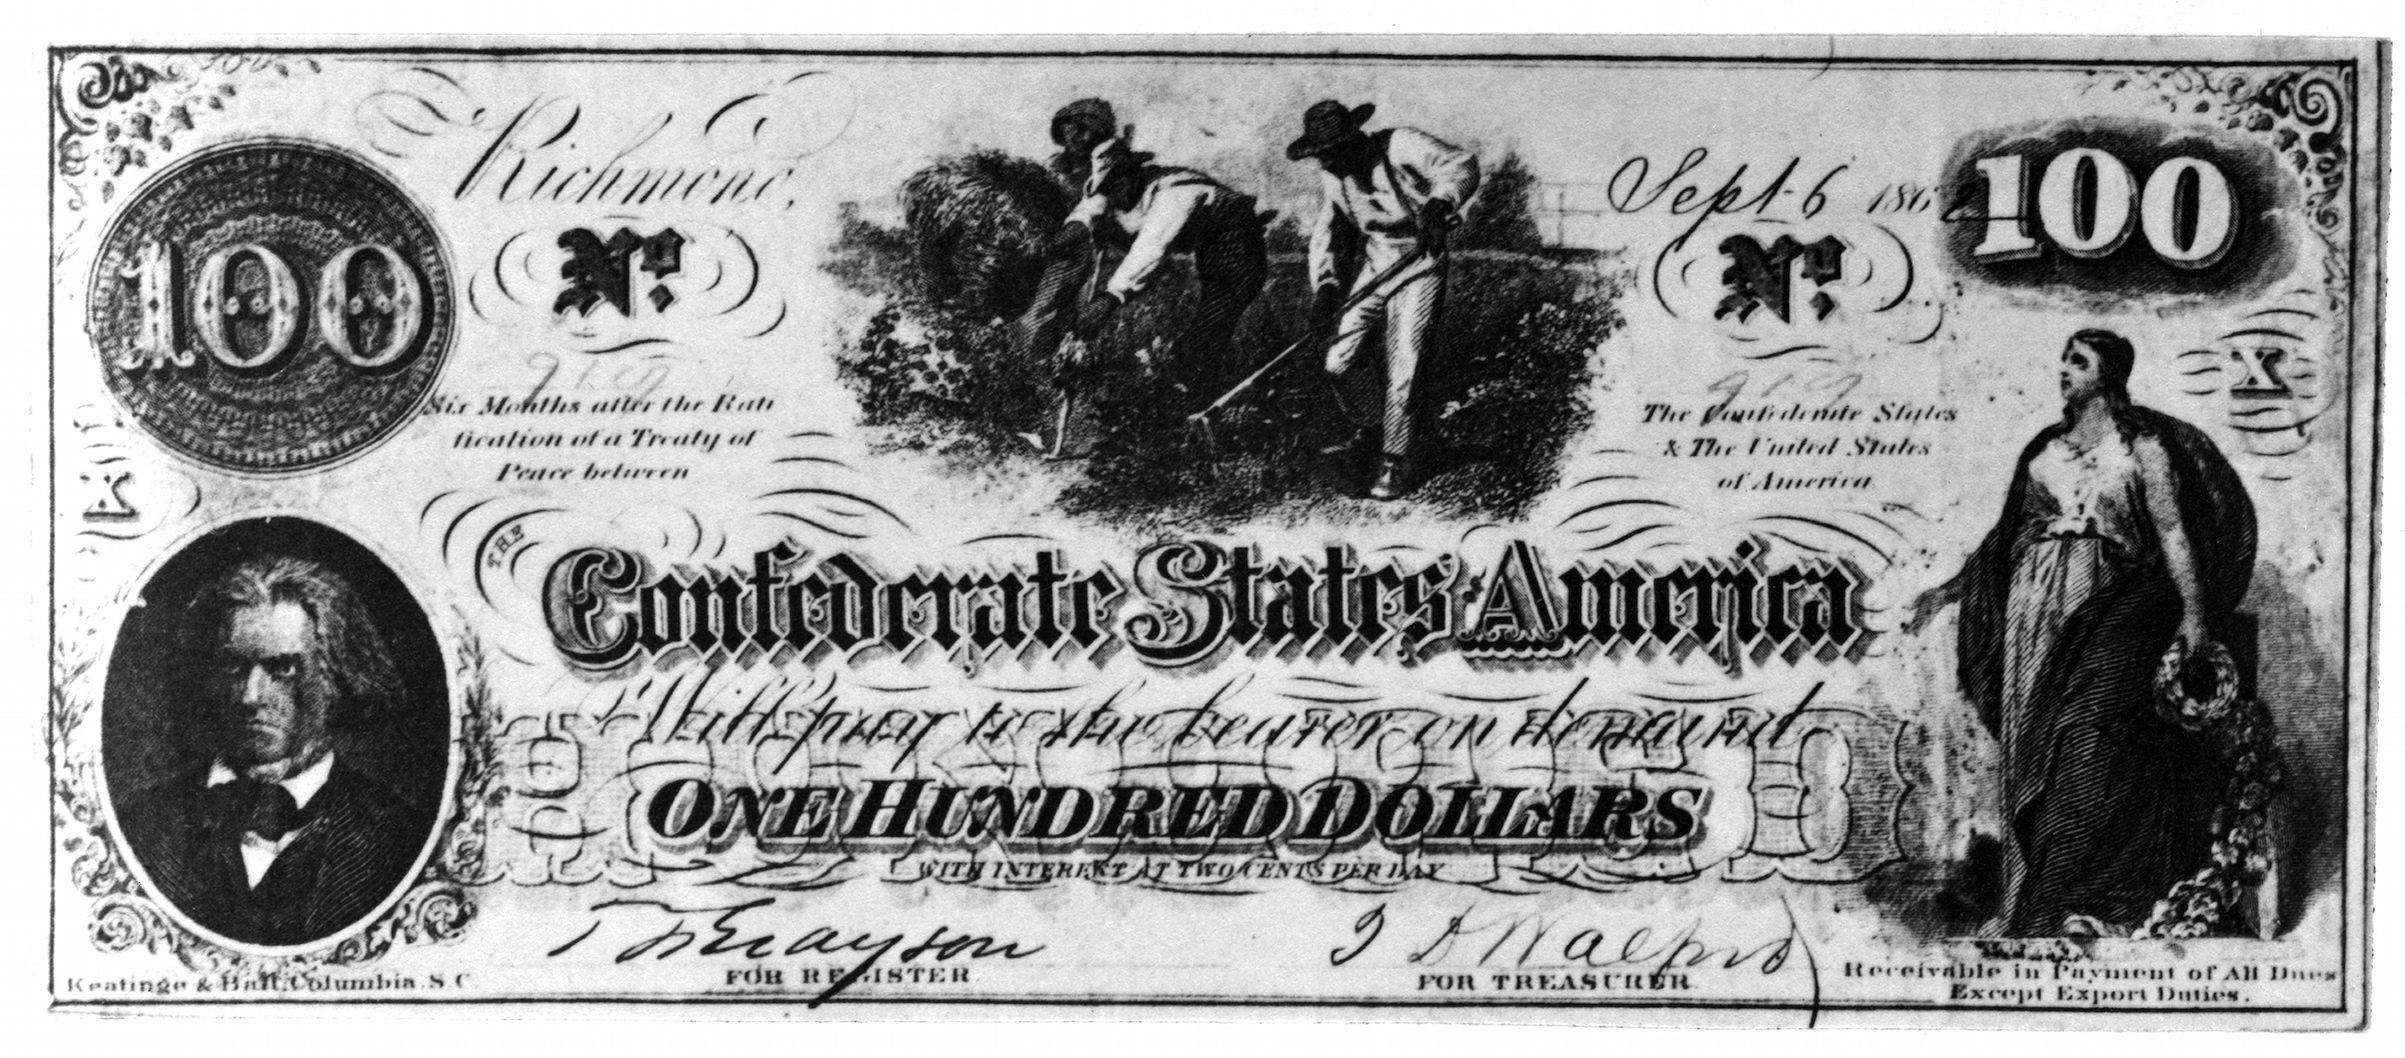 A one hundred dollar note issued by the Confederate States of America, late nineteenth century. (Interim Archives/Getty Images)